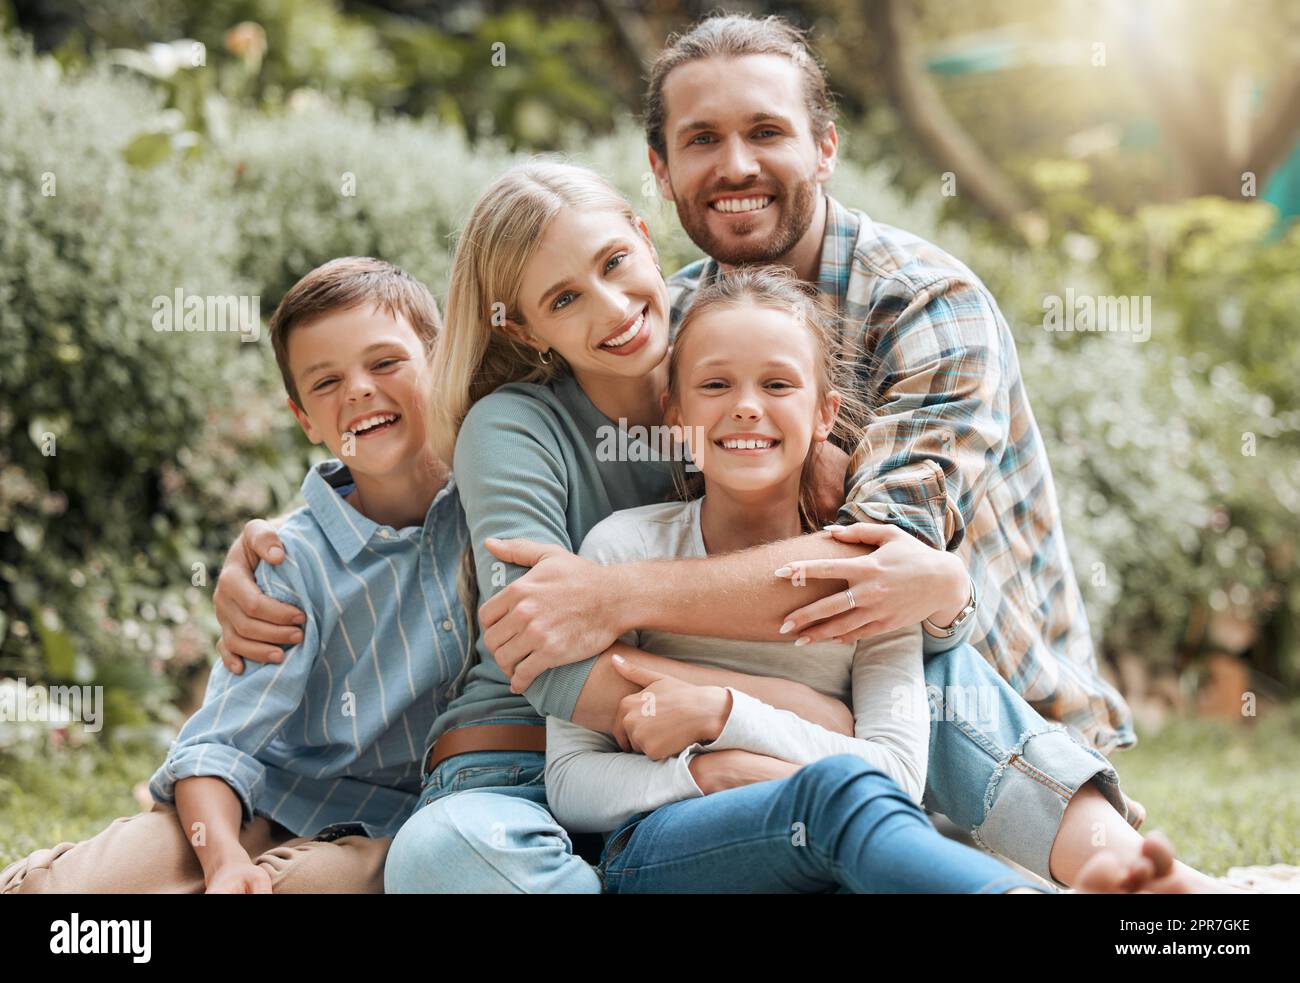 We live for love. Shot of a young family spending some time outside together. Stock Photo